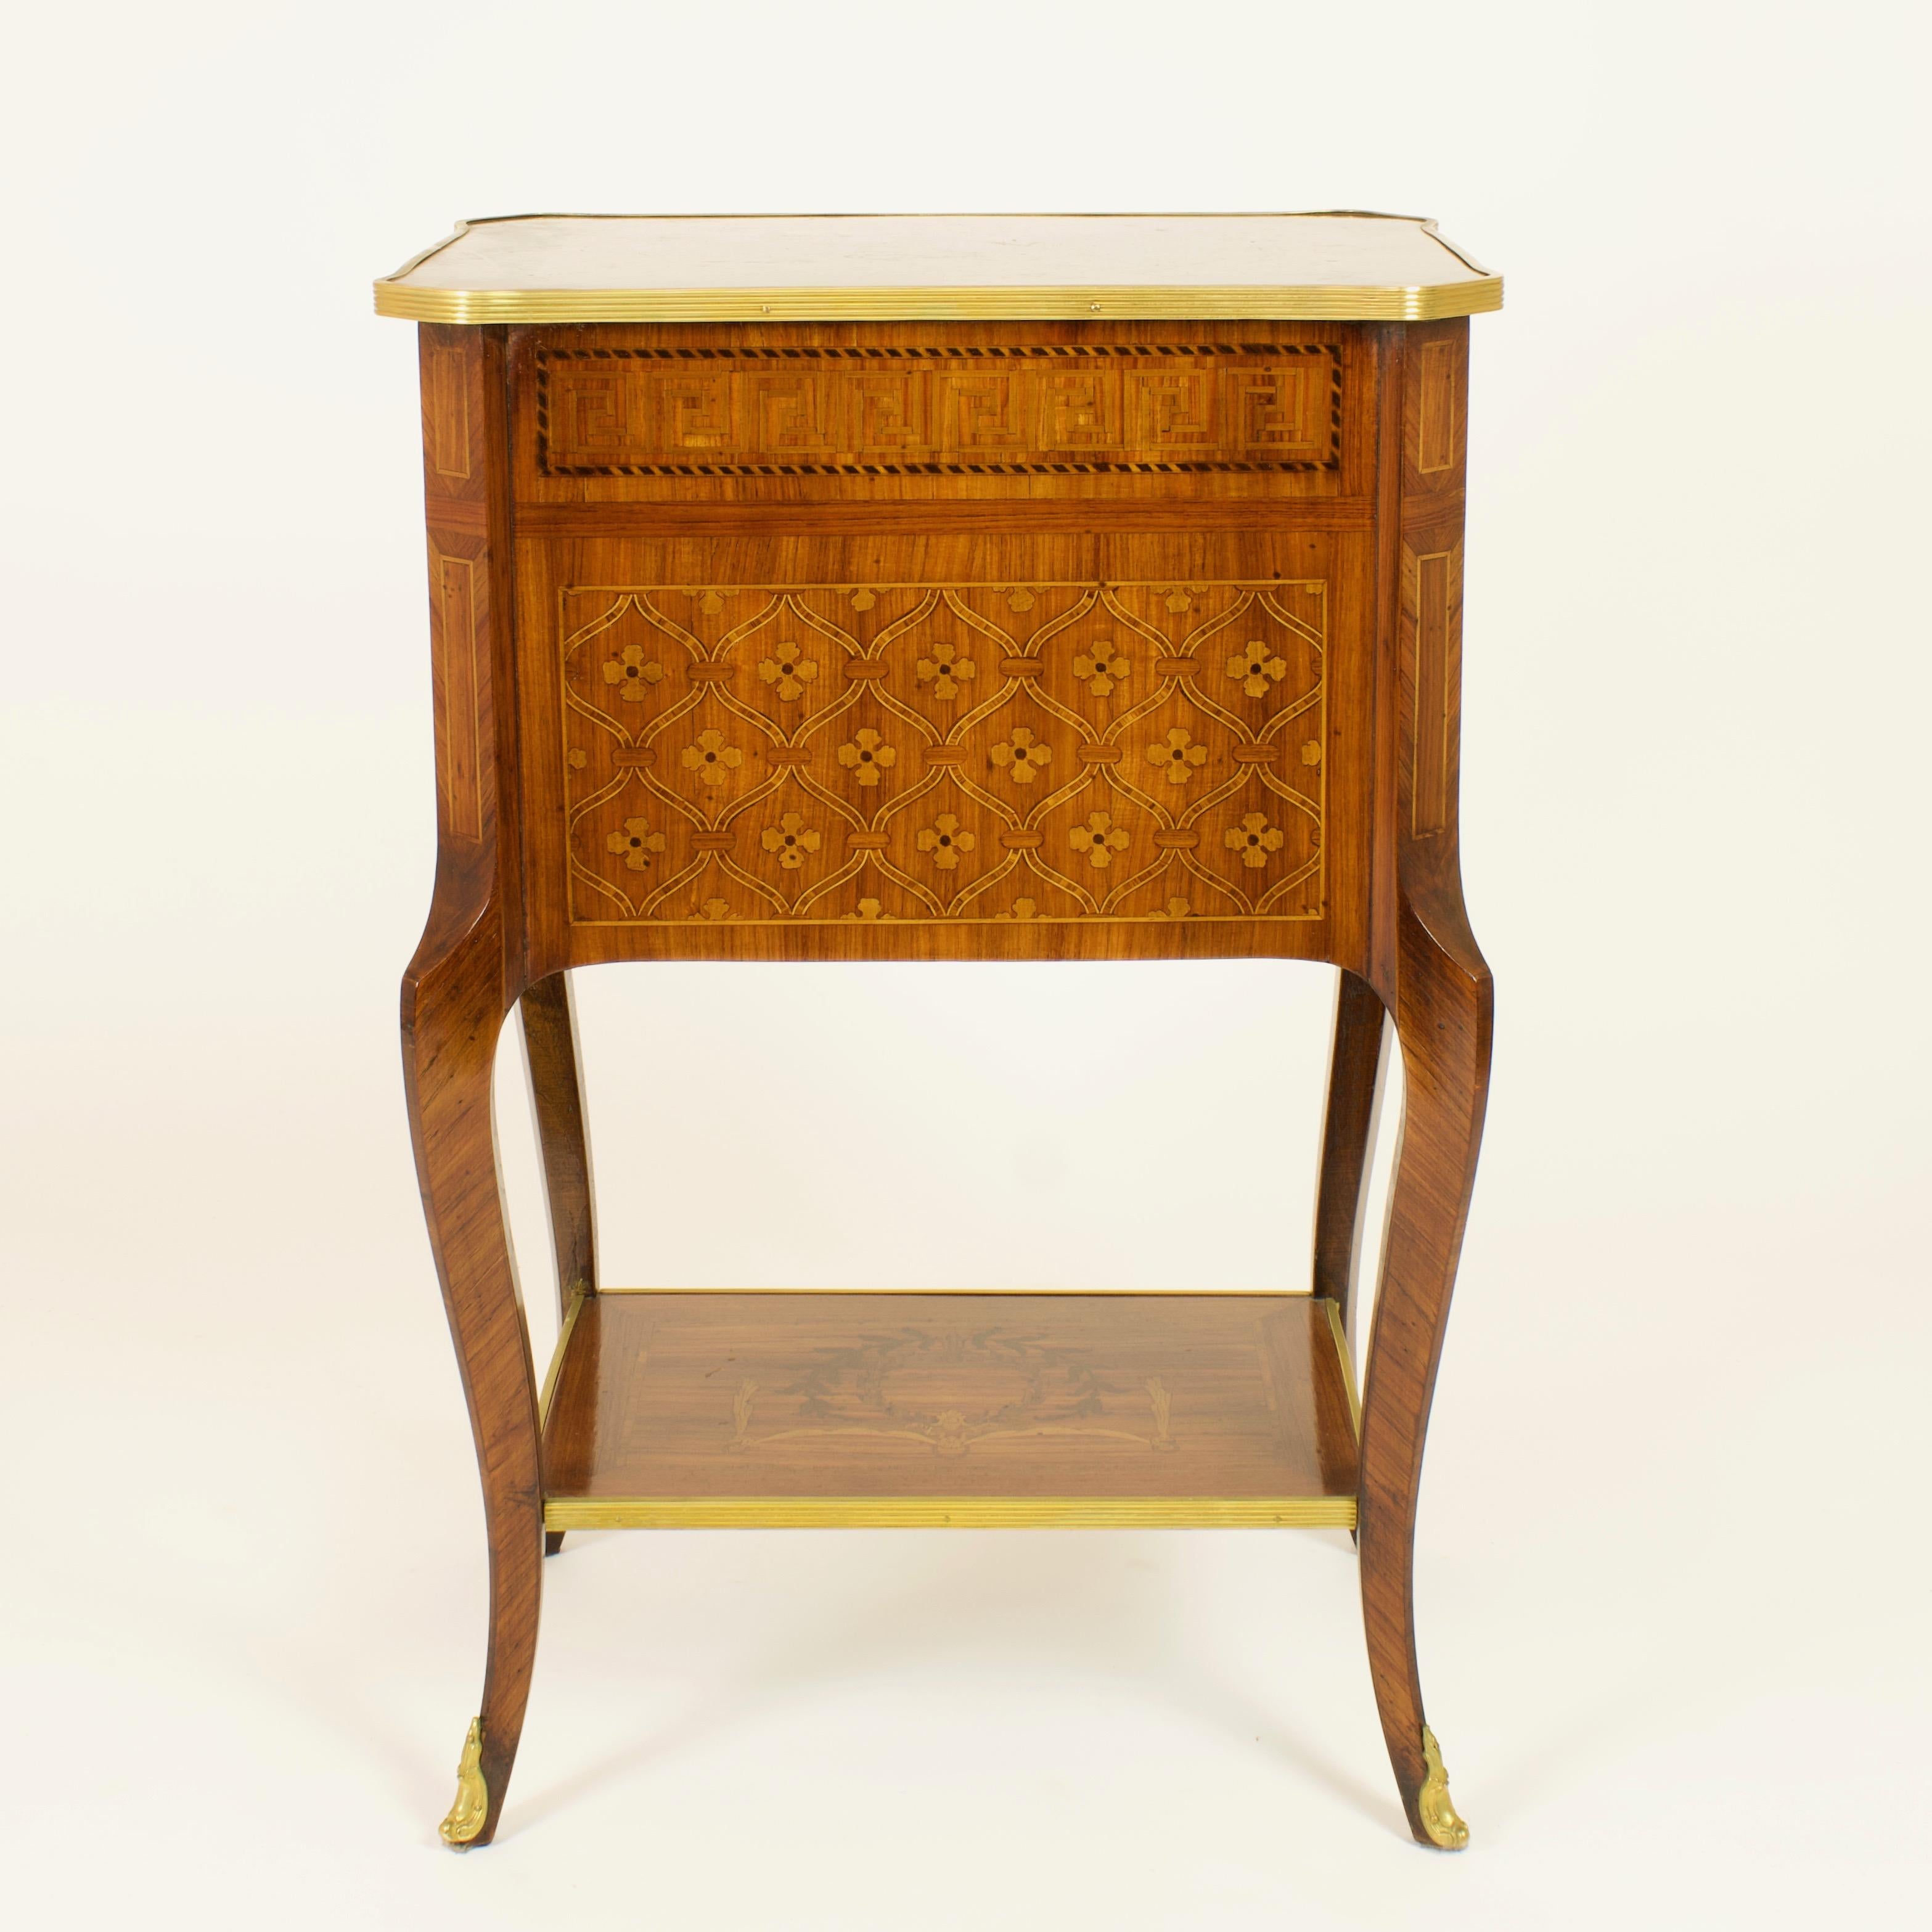 Late 19th Century French Transition/Louis XVI Marquetry a la Reine Side Table For Sale 1